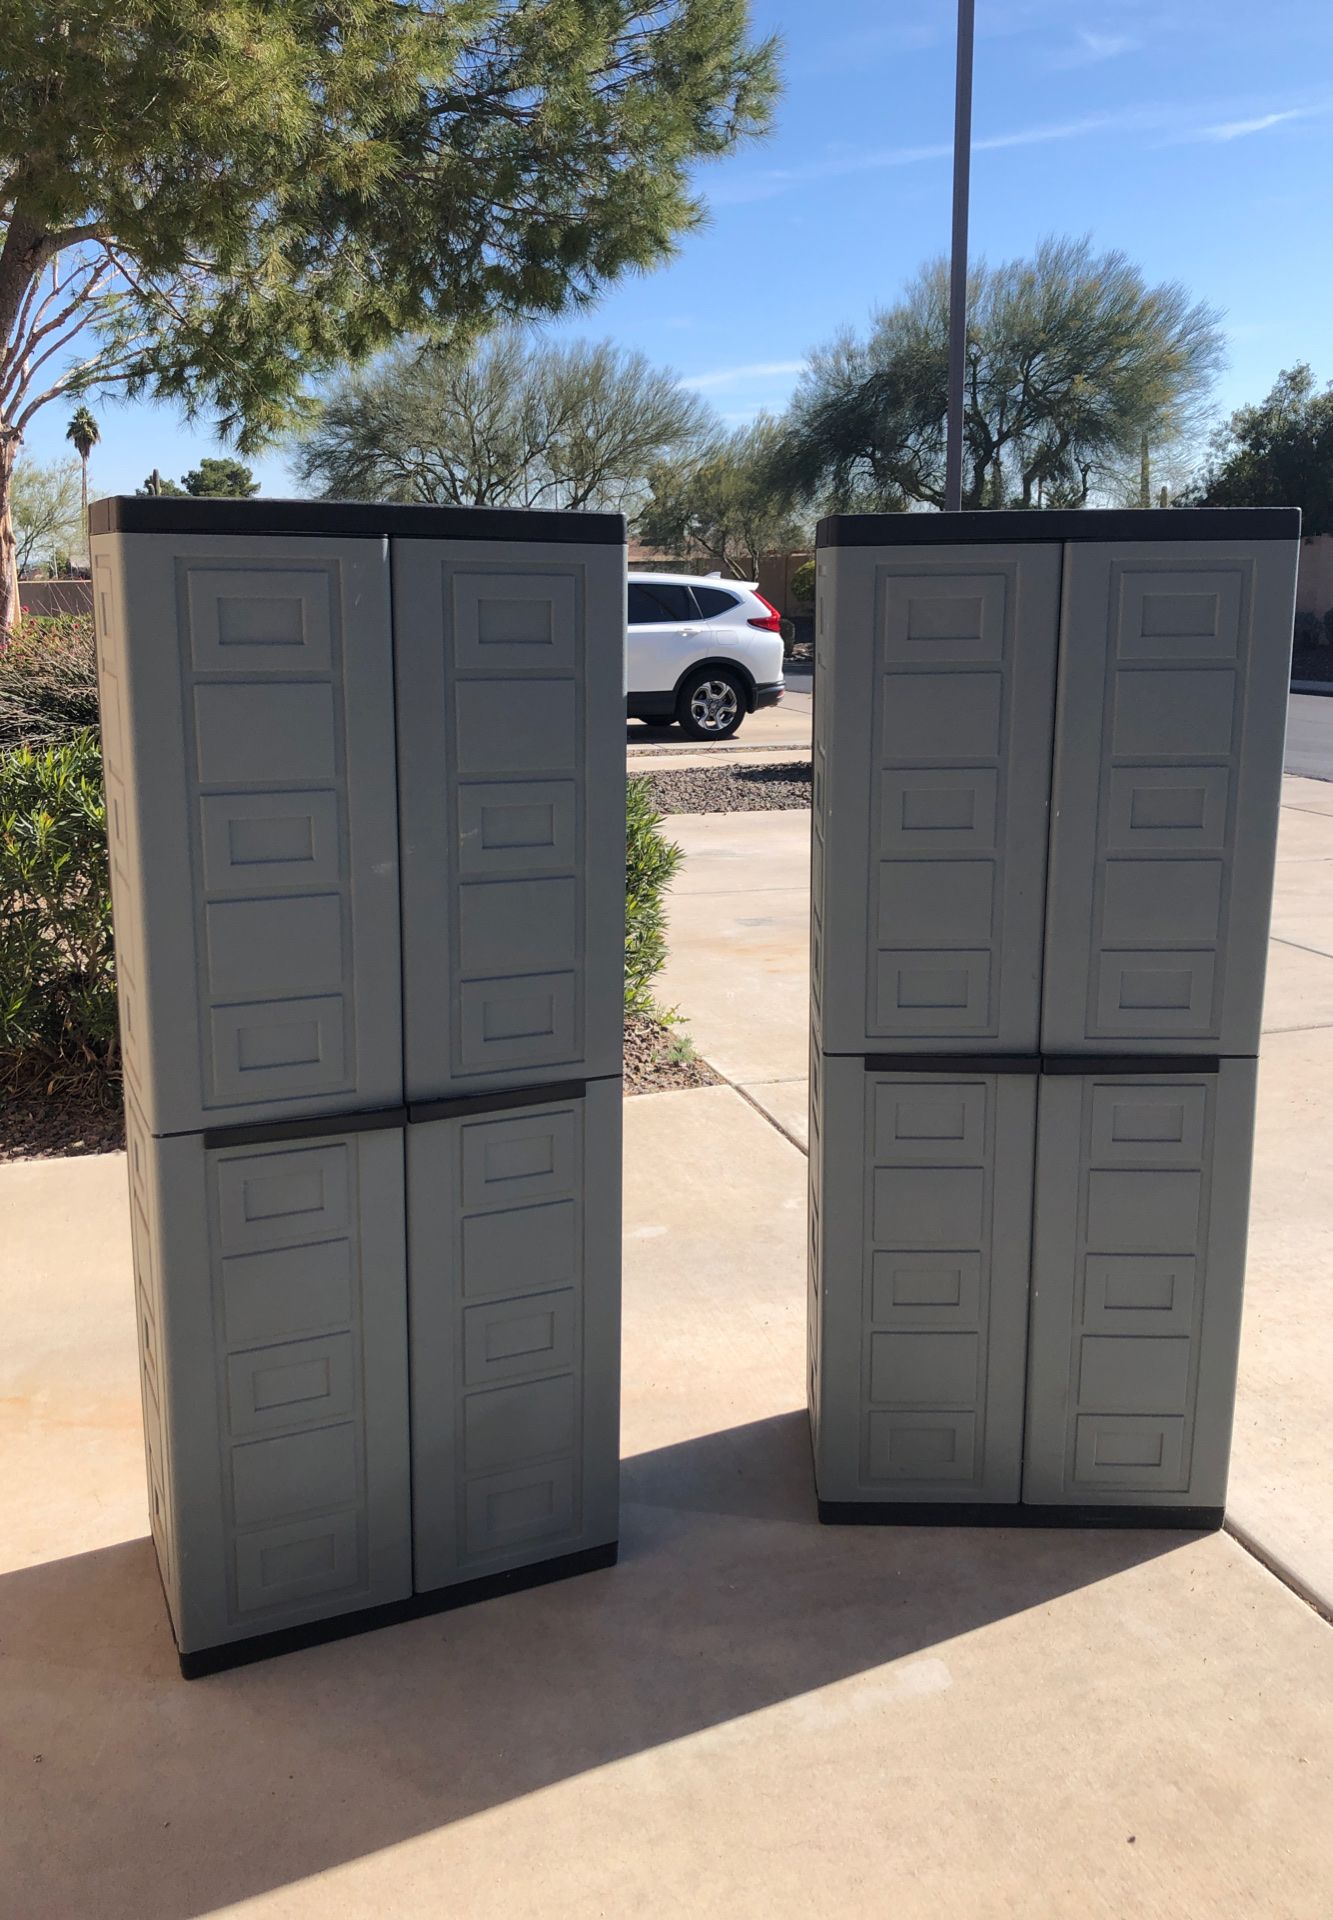 Two plastic storage cabinets with shelves